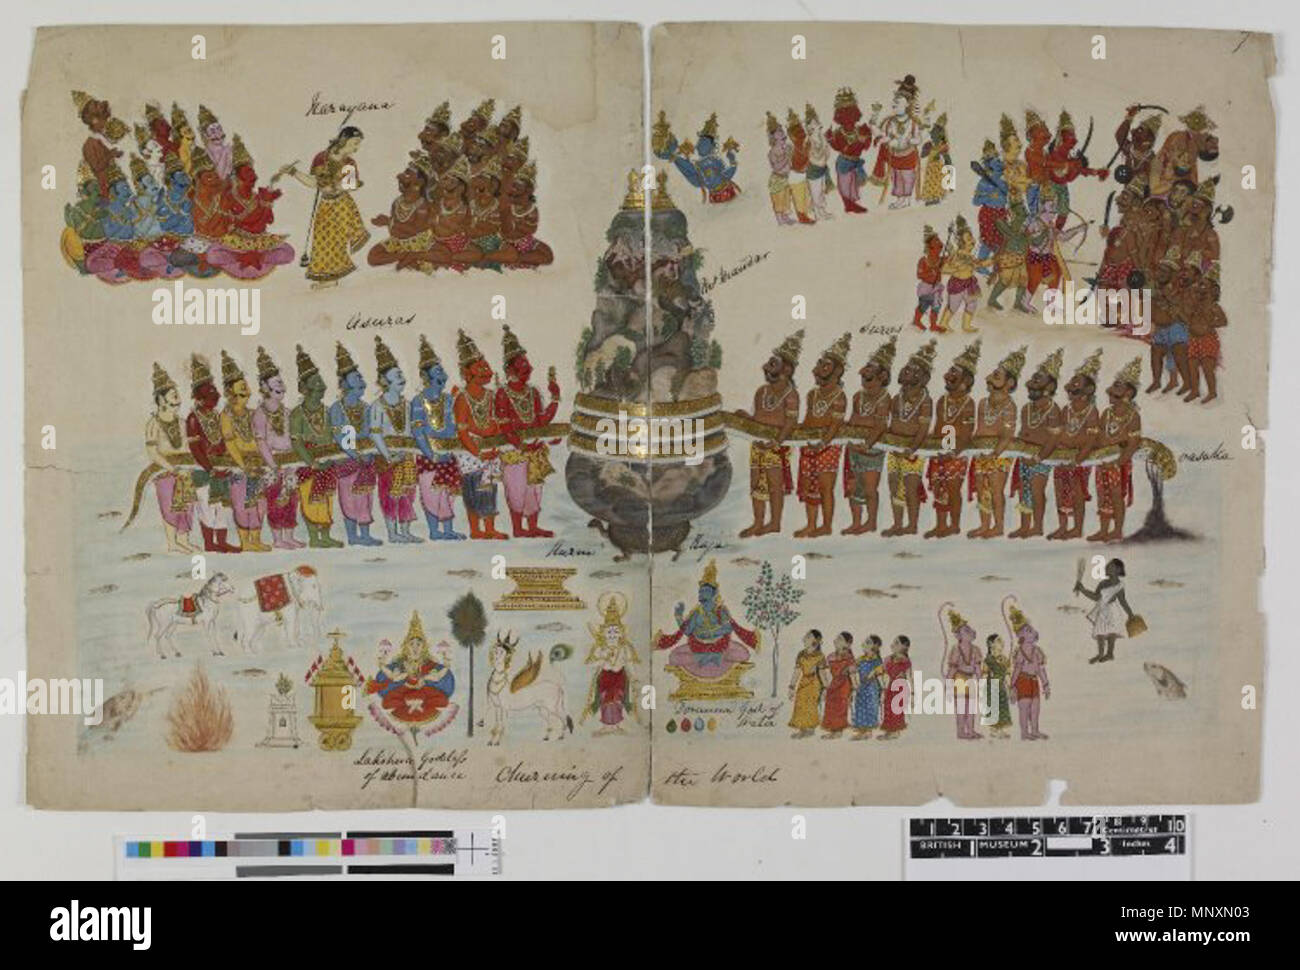 . English: Gouache painting on paper from a portfolio of sixty-three paintings of deities and daily life. Painting on two sheets of paper (taped together) depicting The Churning of the Milky Ocean. In the centre of the page is mount Mandara with a serpant coiled around, being used to churn the ocean to release the Amrita (nectar of immortality) and other precious objects. Other deities are shown surrounding this central scene. circa 1820. Company School 1170 The Churning of the Milky Ocean Stock Photo